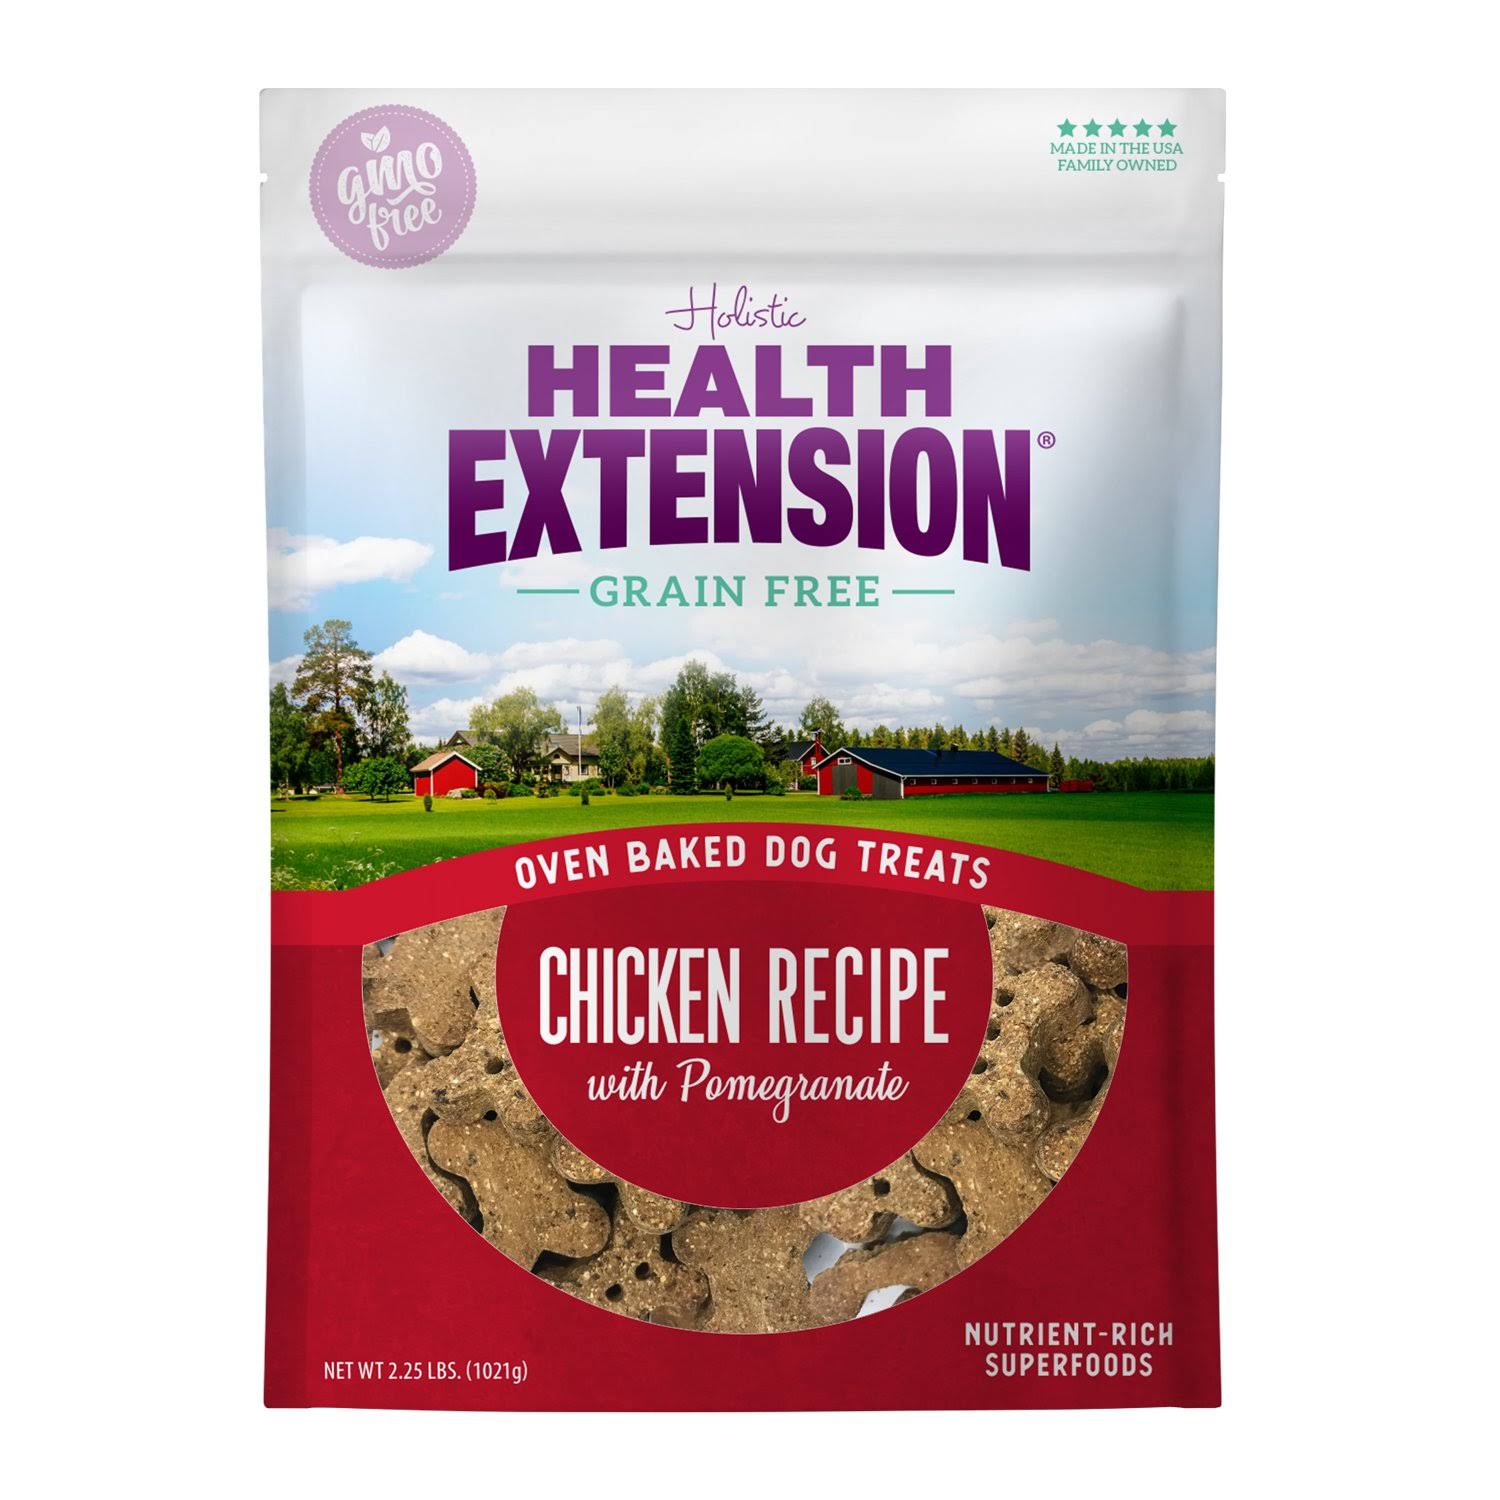 Health Extension Oven Baked Chicken Recipe with Pomegranate Grain Free Dog Treats 2.25 lb